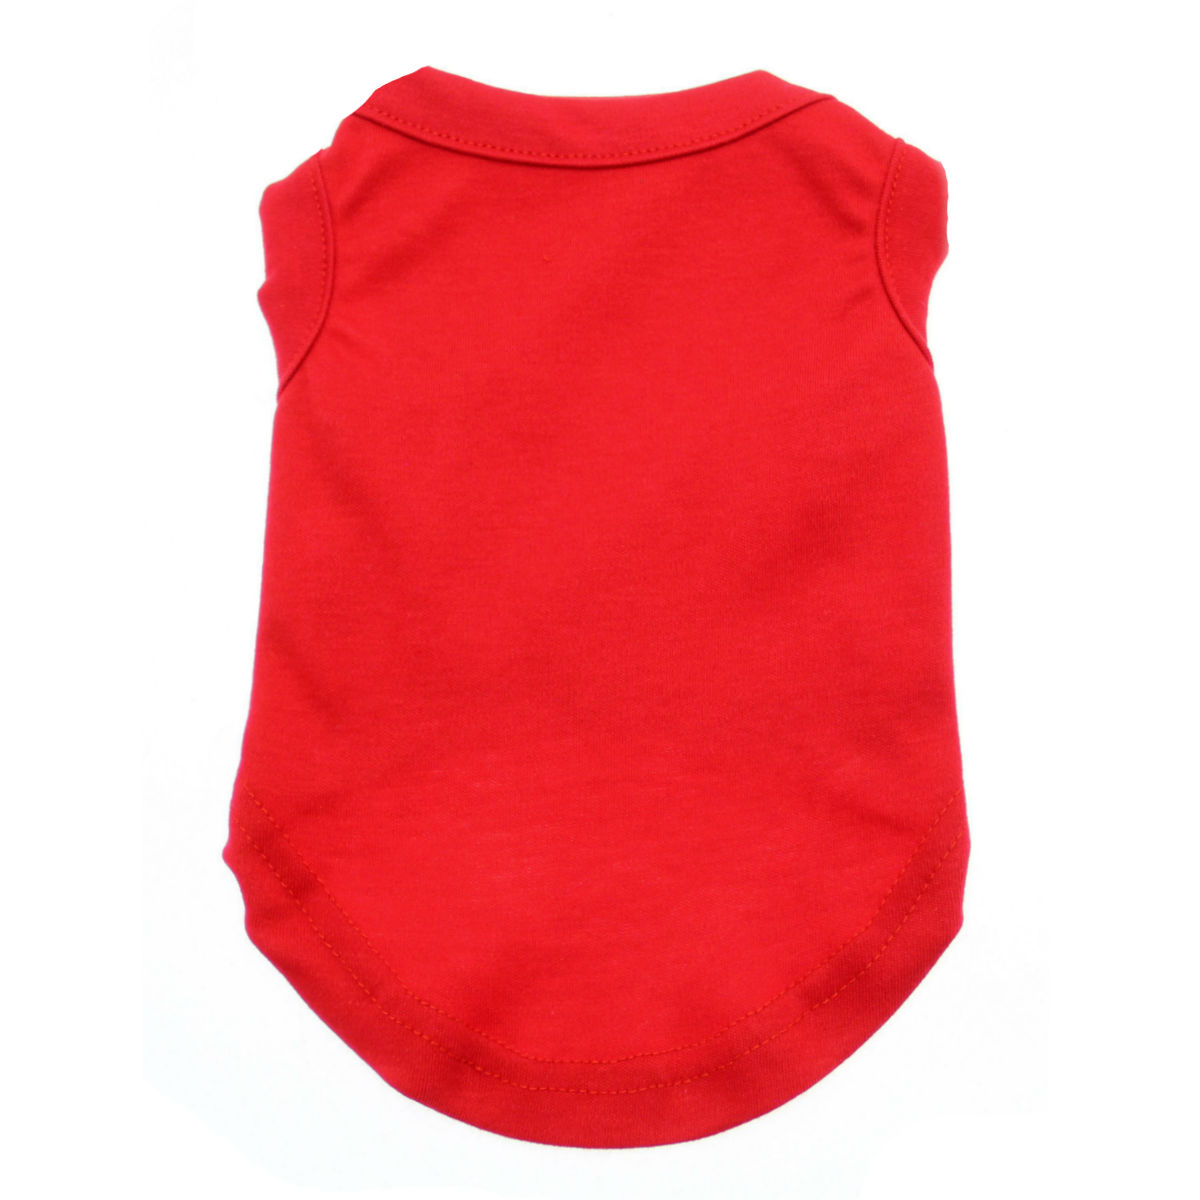 Plain Dog and Cat Shirt - Red